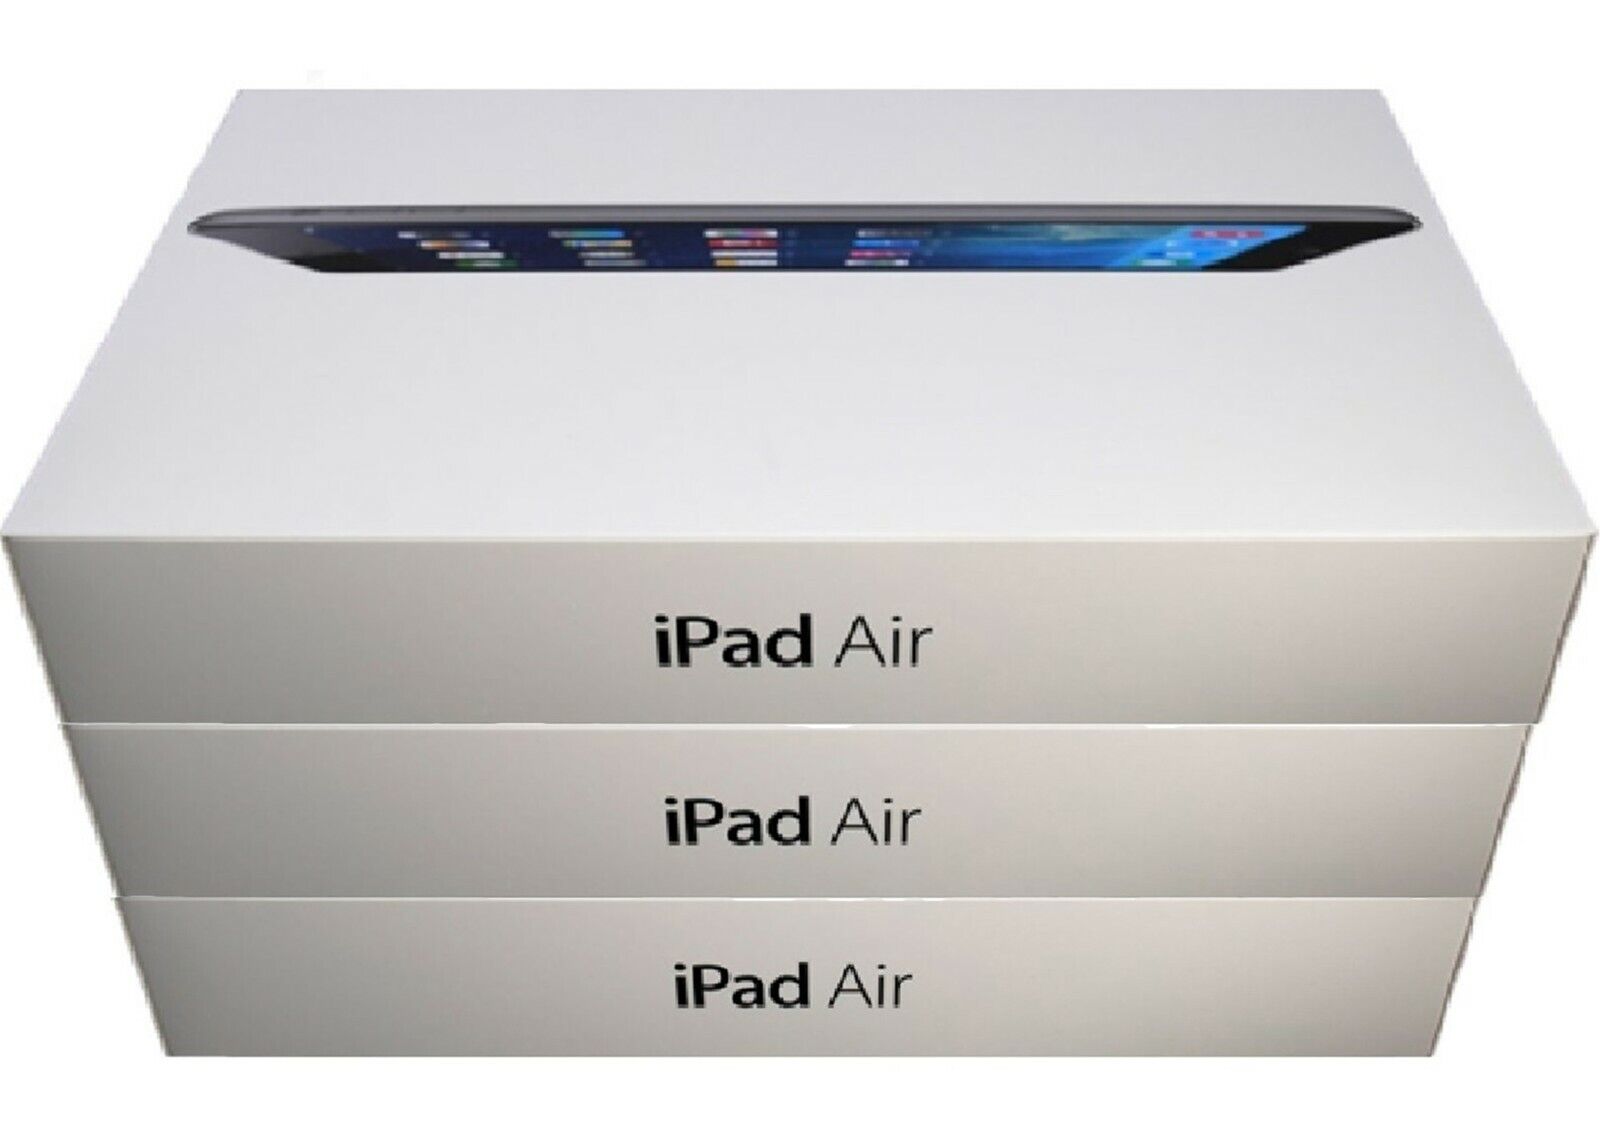 Apple iPad Air - 9.7-inch, Space Gray, 32GB, Wi-Fi Only, Exclusive 